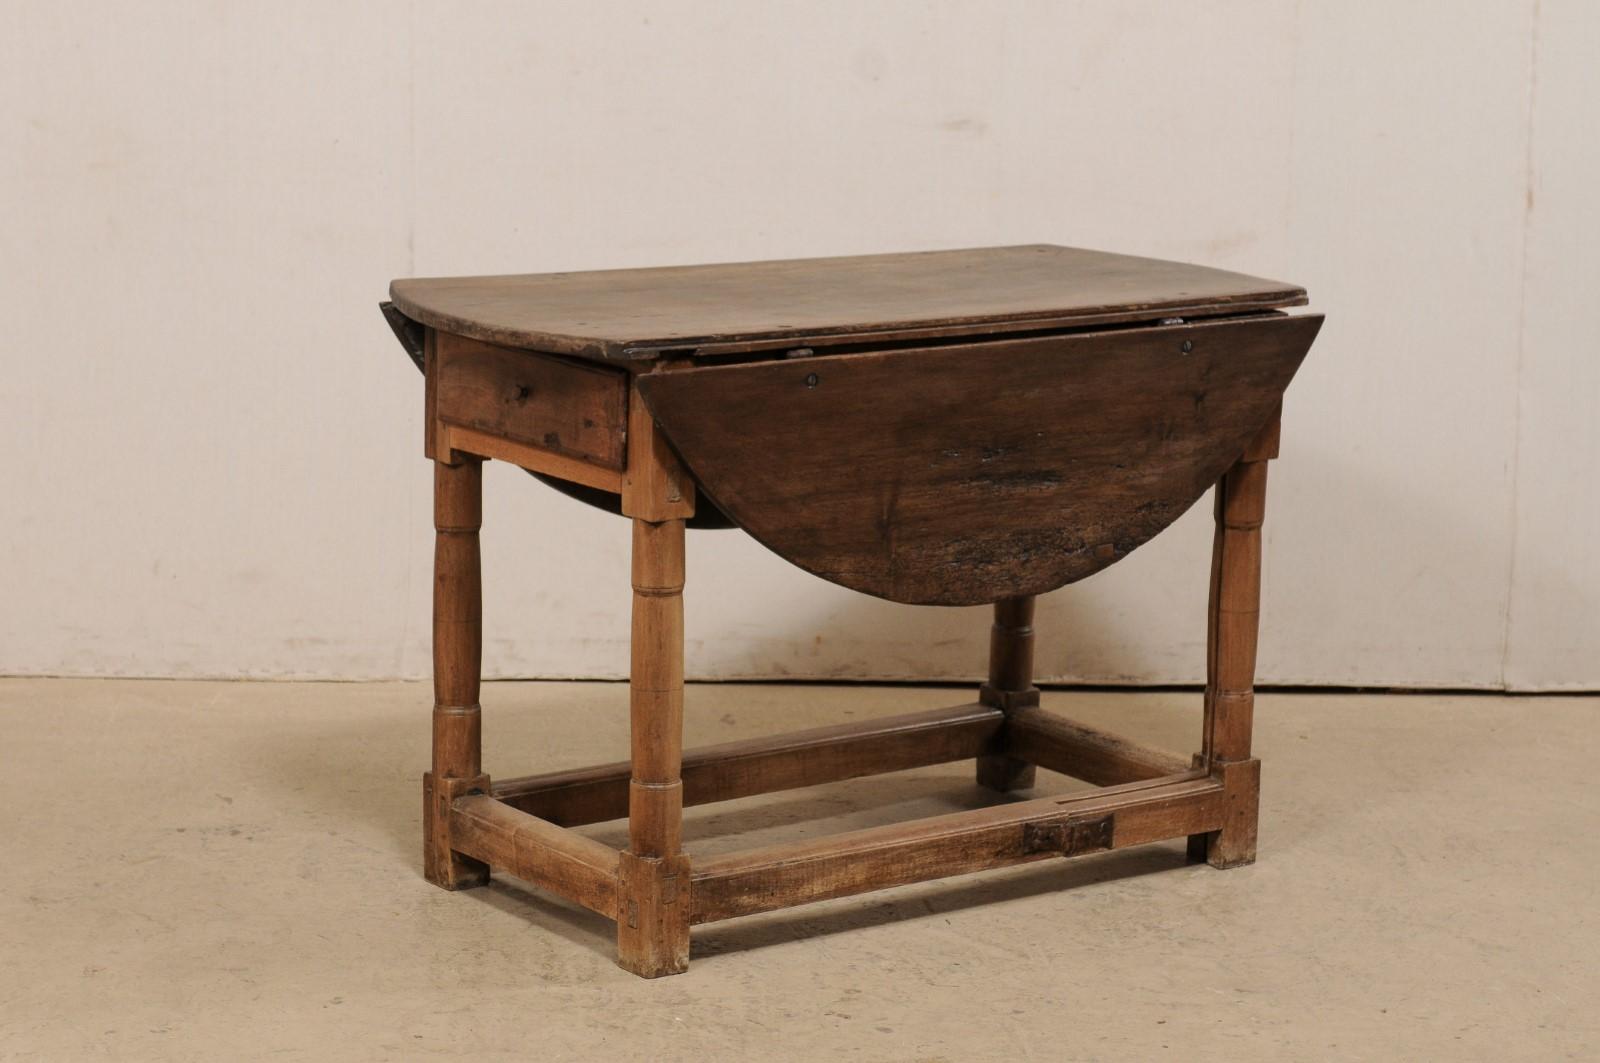 An Italian double gate-leg table from the turn of the 18th and 19th century. This antique table from Italy features a rectangular-shaped center top flanked within two drop leaves along either side, which when raised and supported by the beautifully